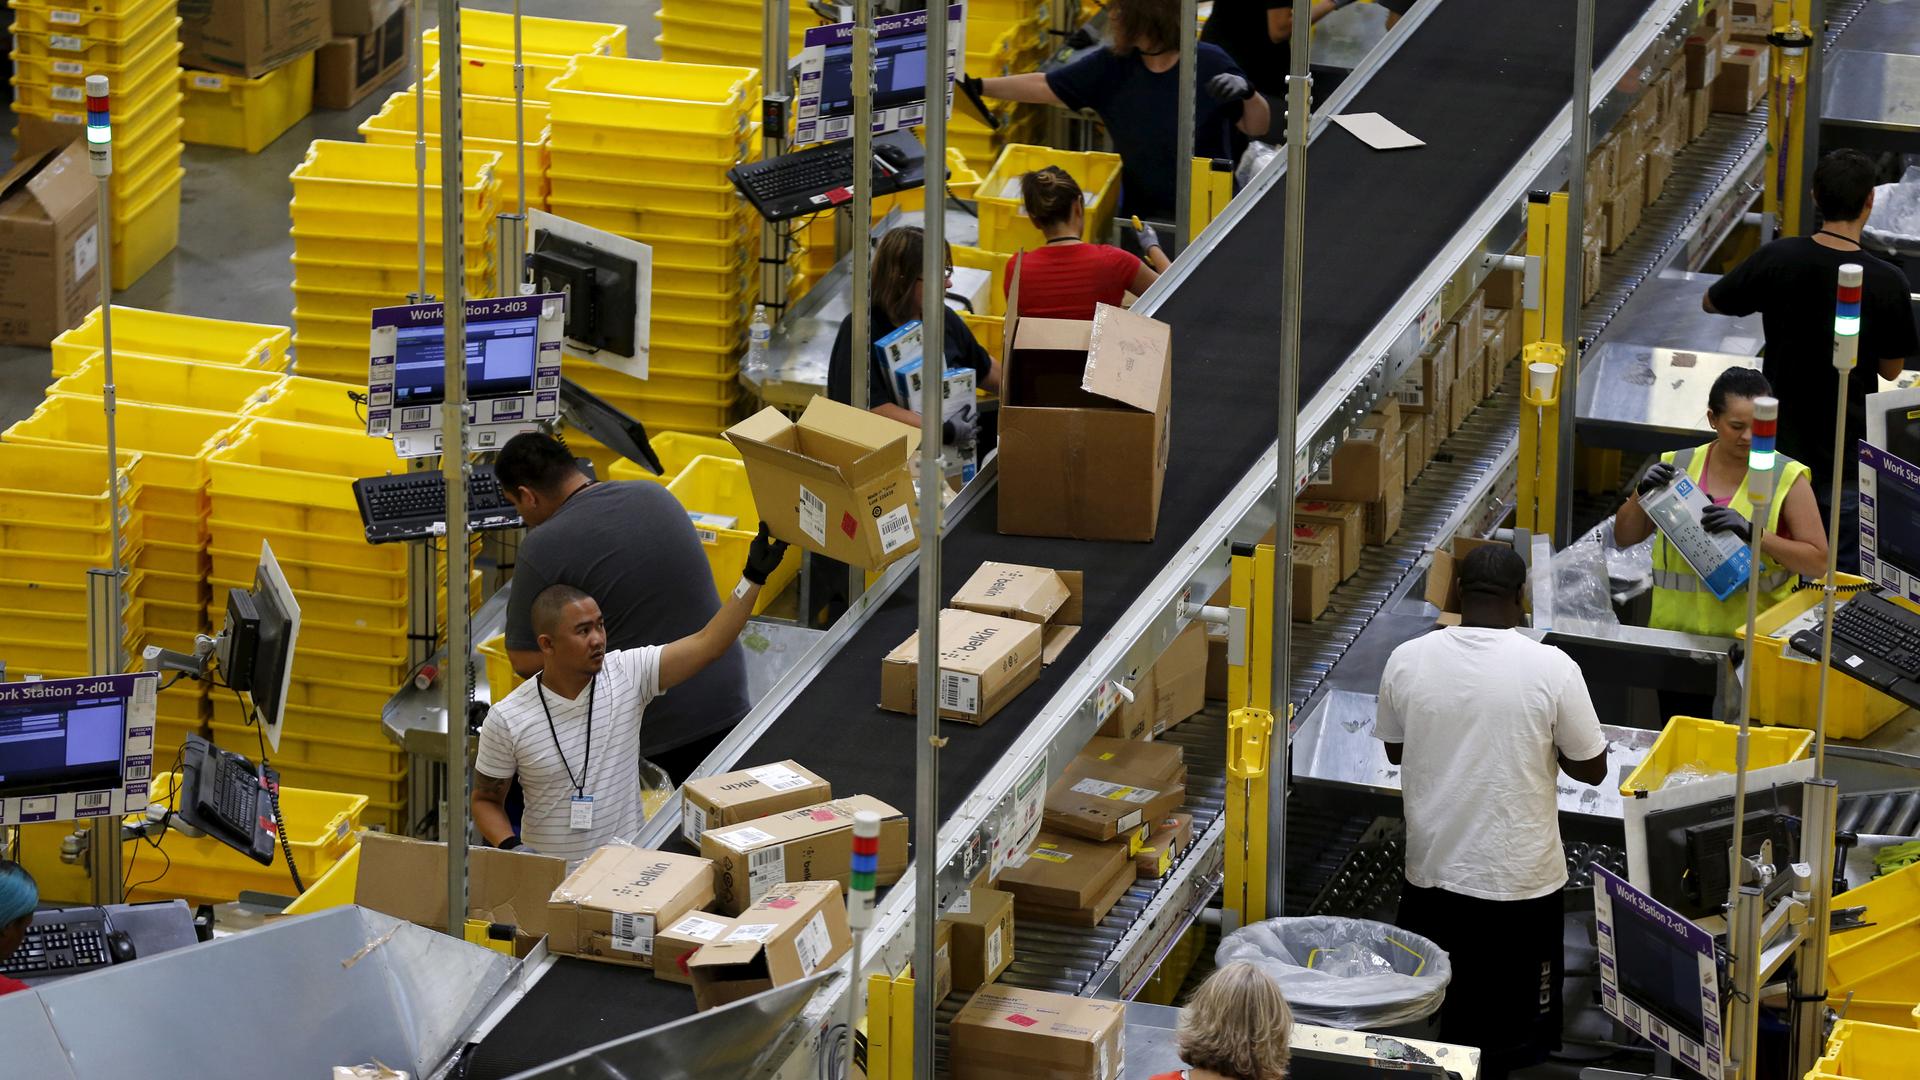 Workers sort arriving products at an Amazon Fulfilment Center in Tracy, Calif.